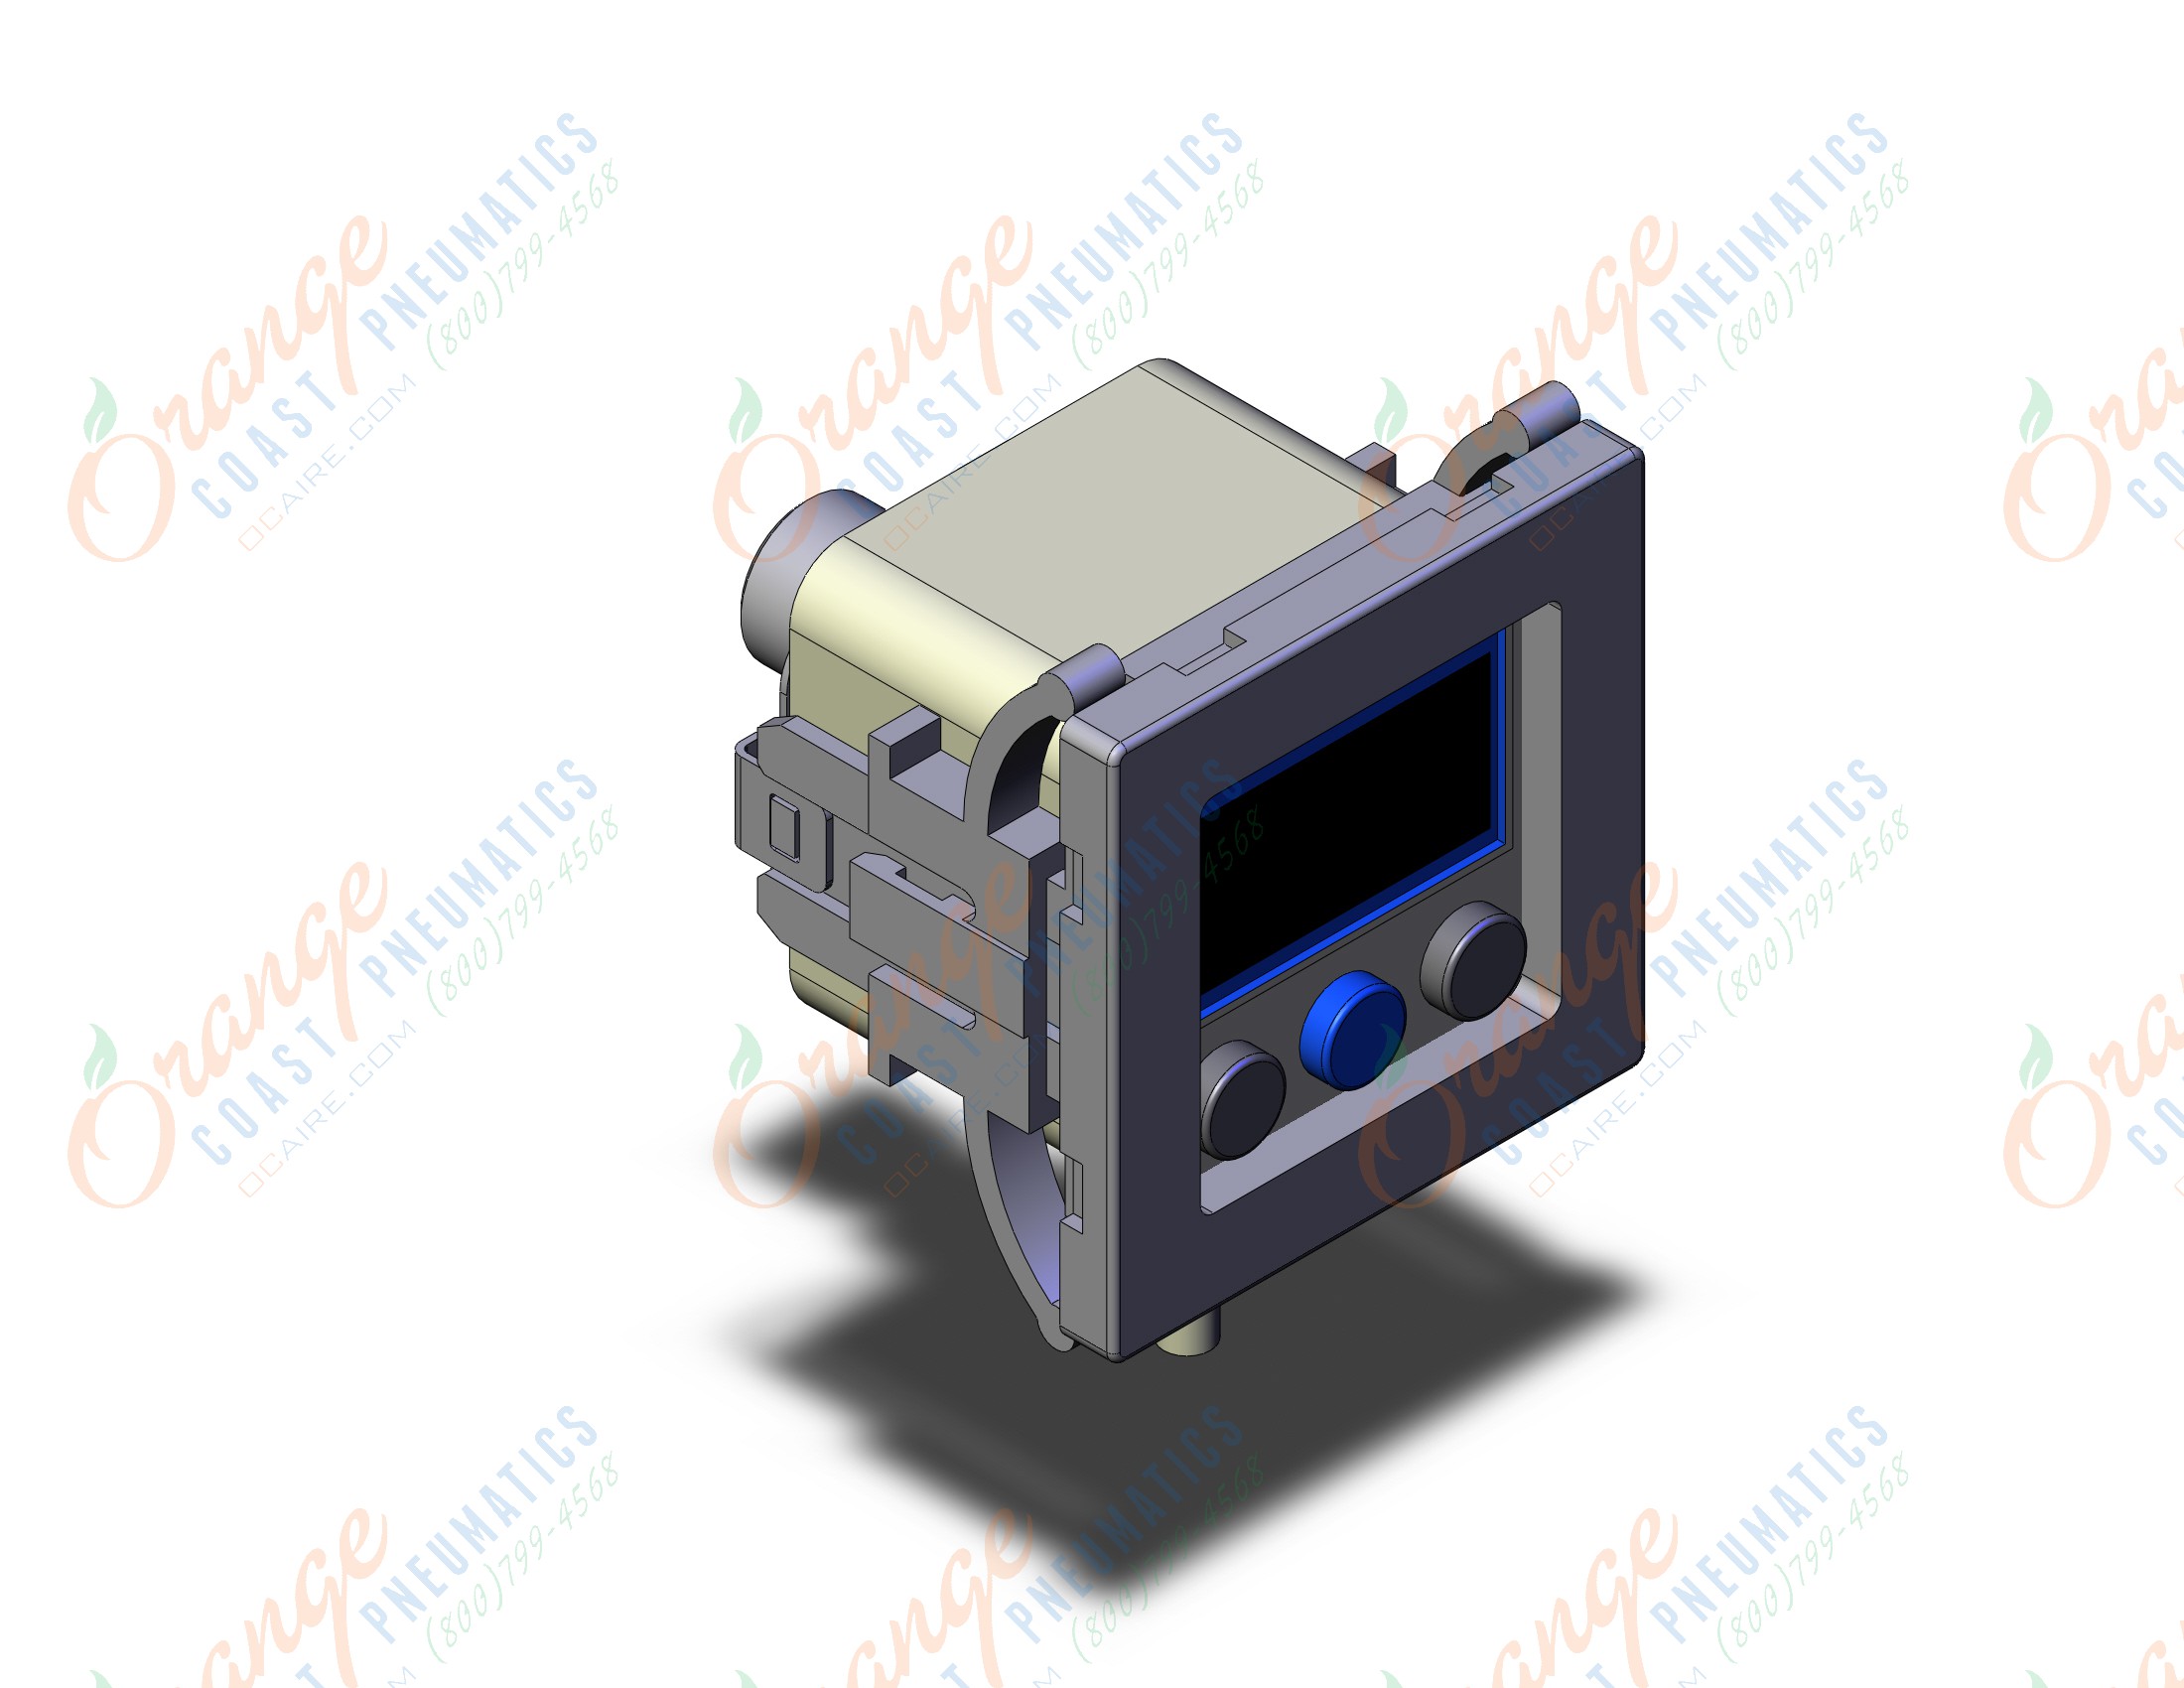 SMC ISE40A-N01-V-E ise40/50/60 1/8" npt version, ISE40/50/60 PRESSURE SWITCH